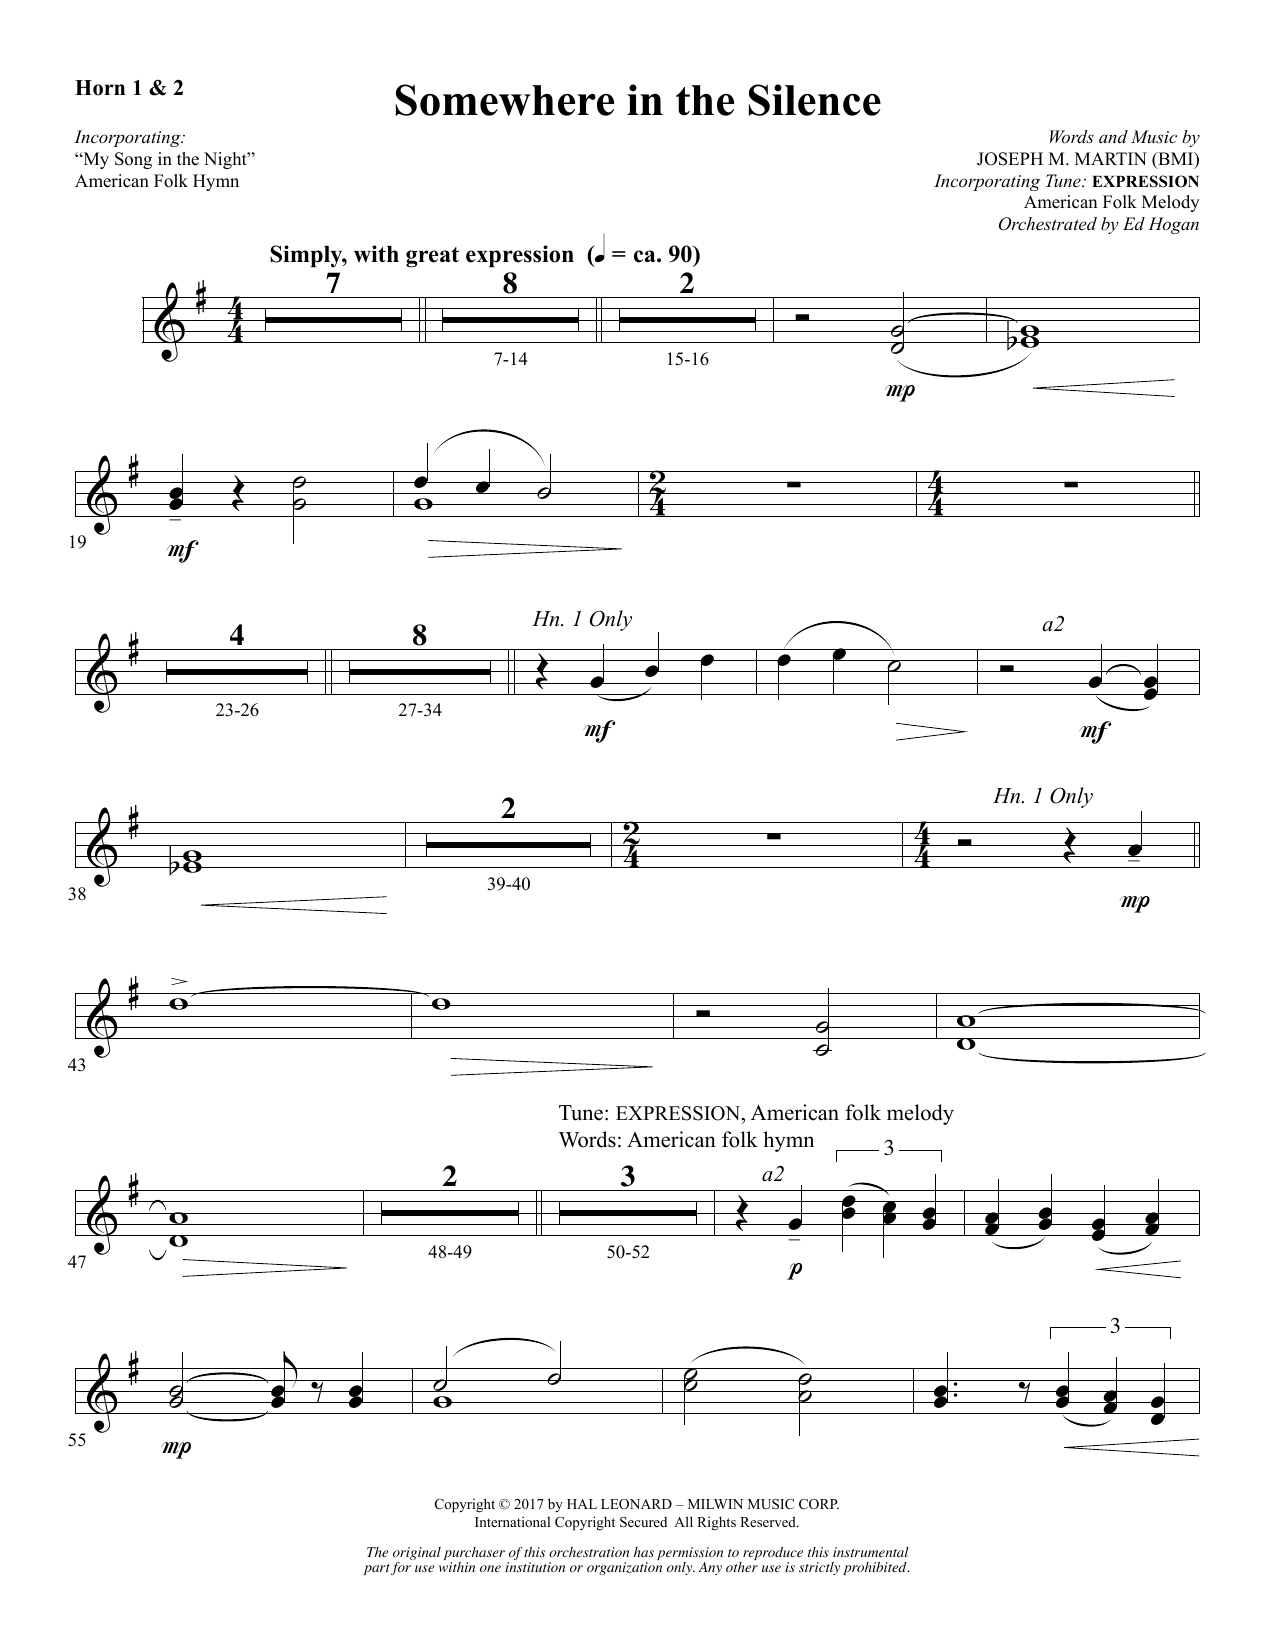 Download Joseph M. Martin Somewhere in the Silence - F Horn 1 & 2 Sheet Music